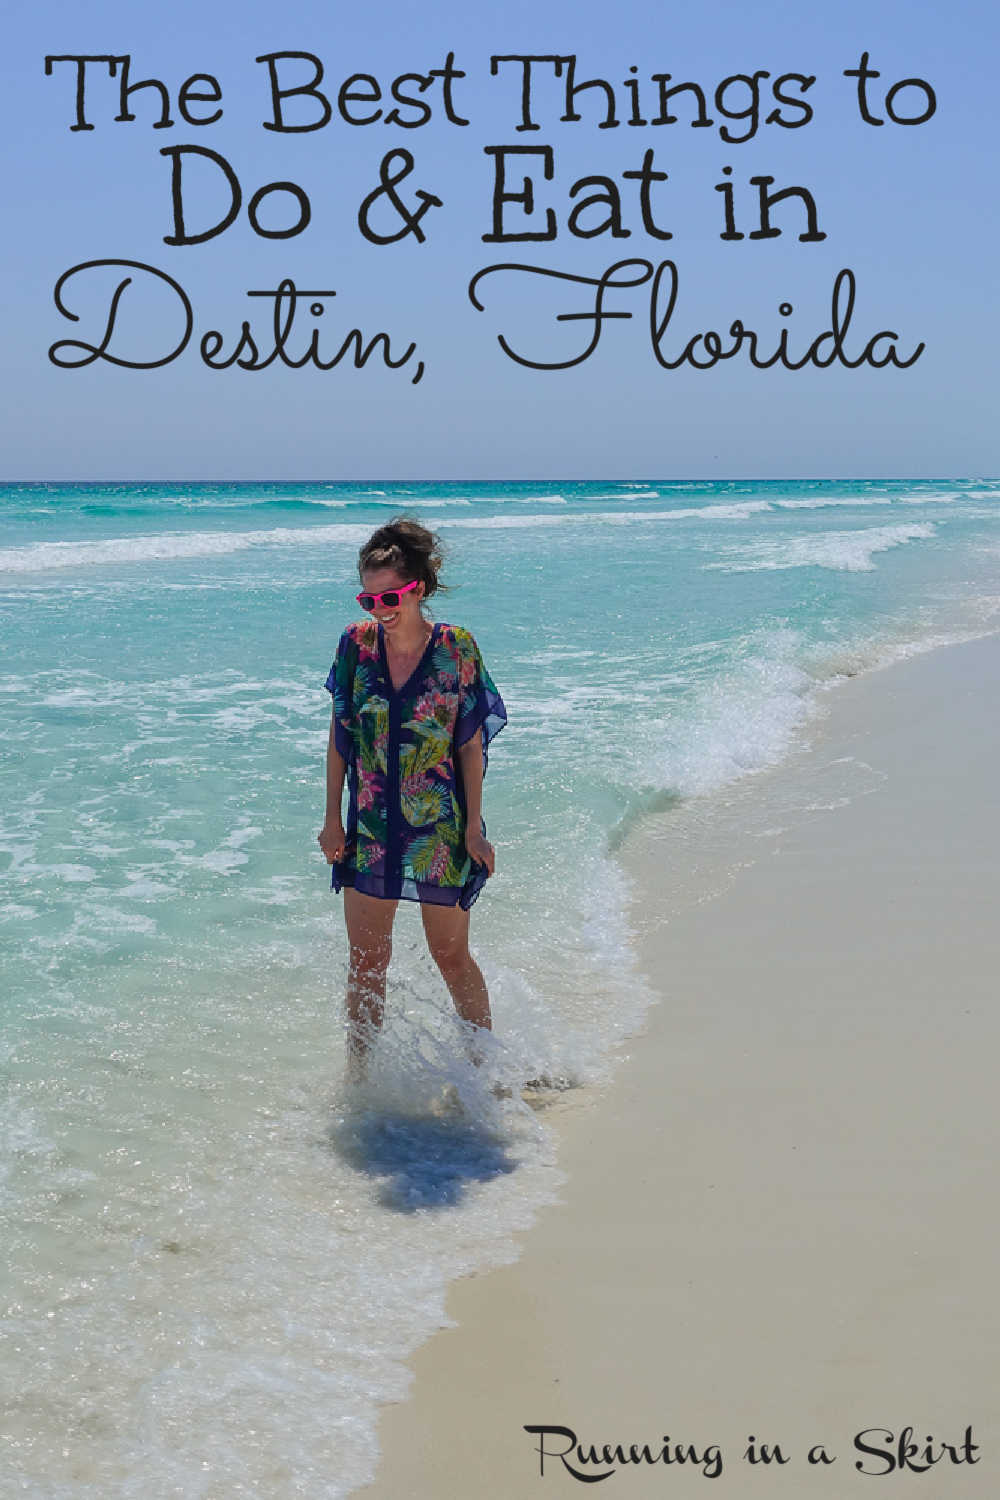 Things to Do in Destin Florida - the best beach vacation tips and places to enjoy the water. Also includes must do restaurant and food ideas and activities. Gorgeous pictures and sunset photos. / Running in a Skirt #Destin #Florida #Travel #Beach #Vacation via @juliewunder